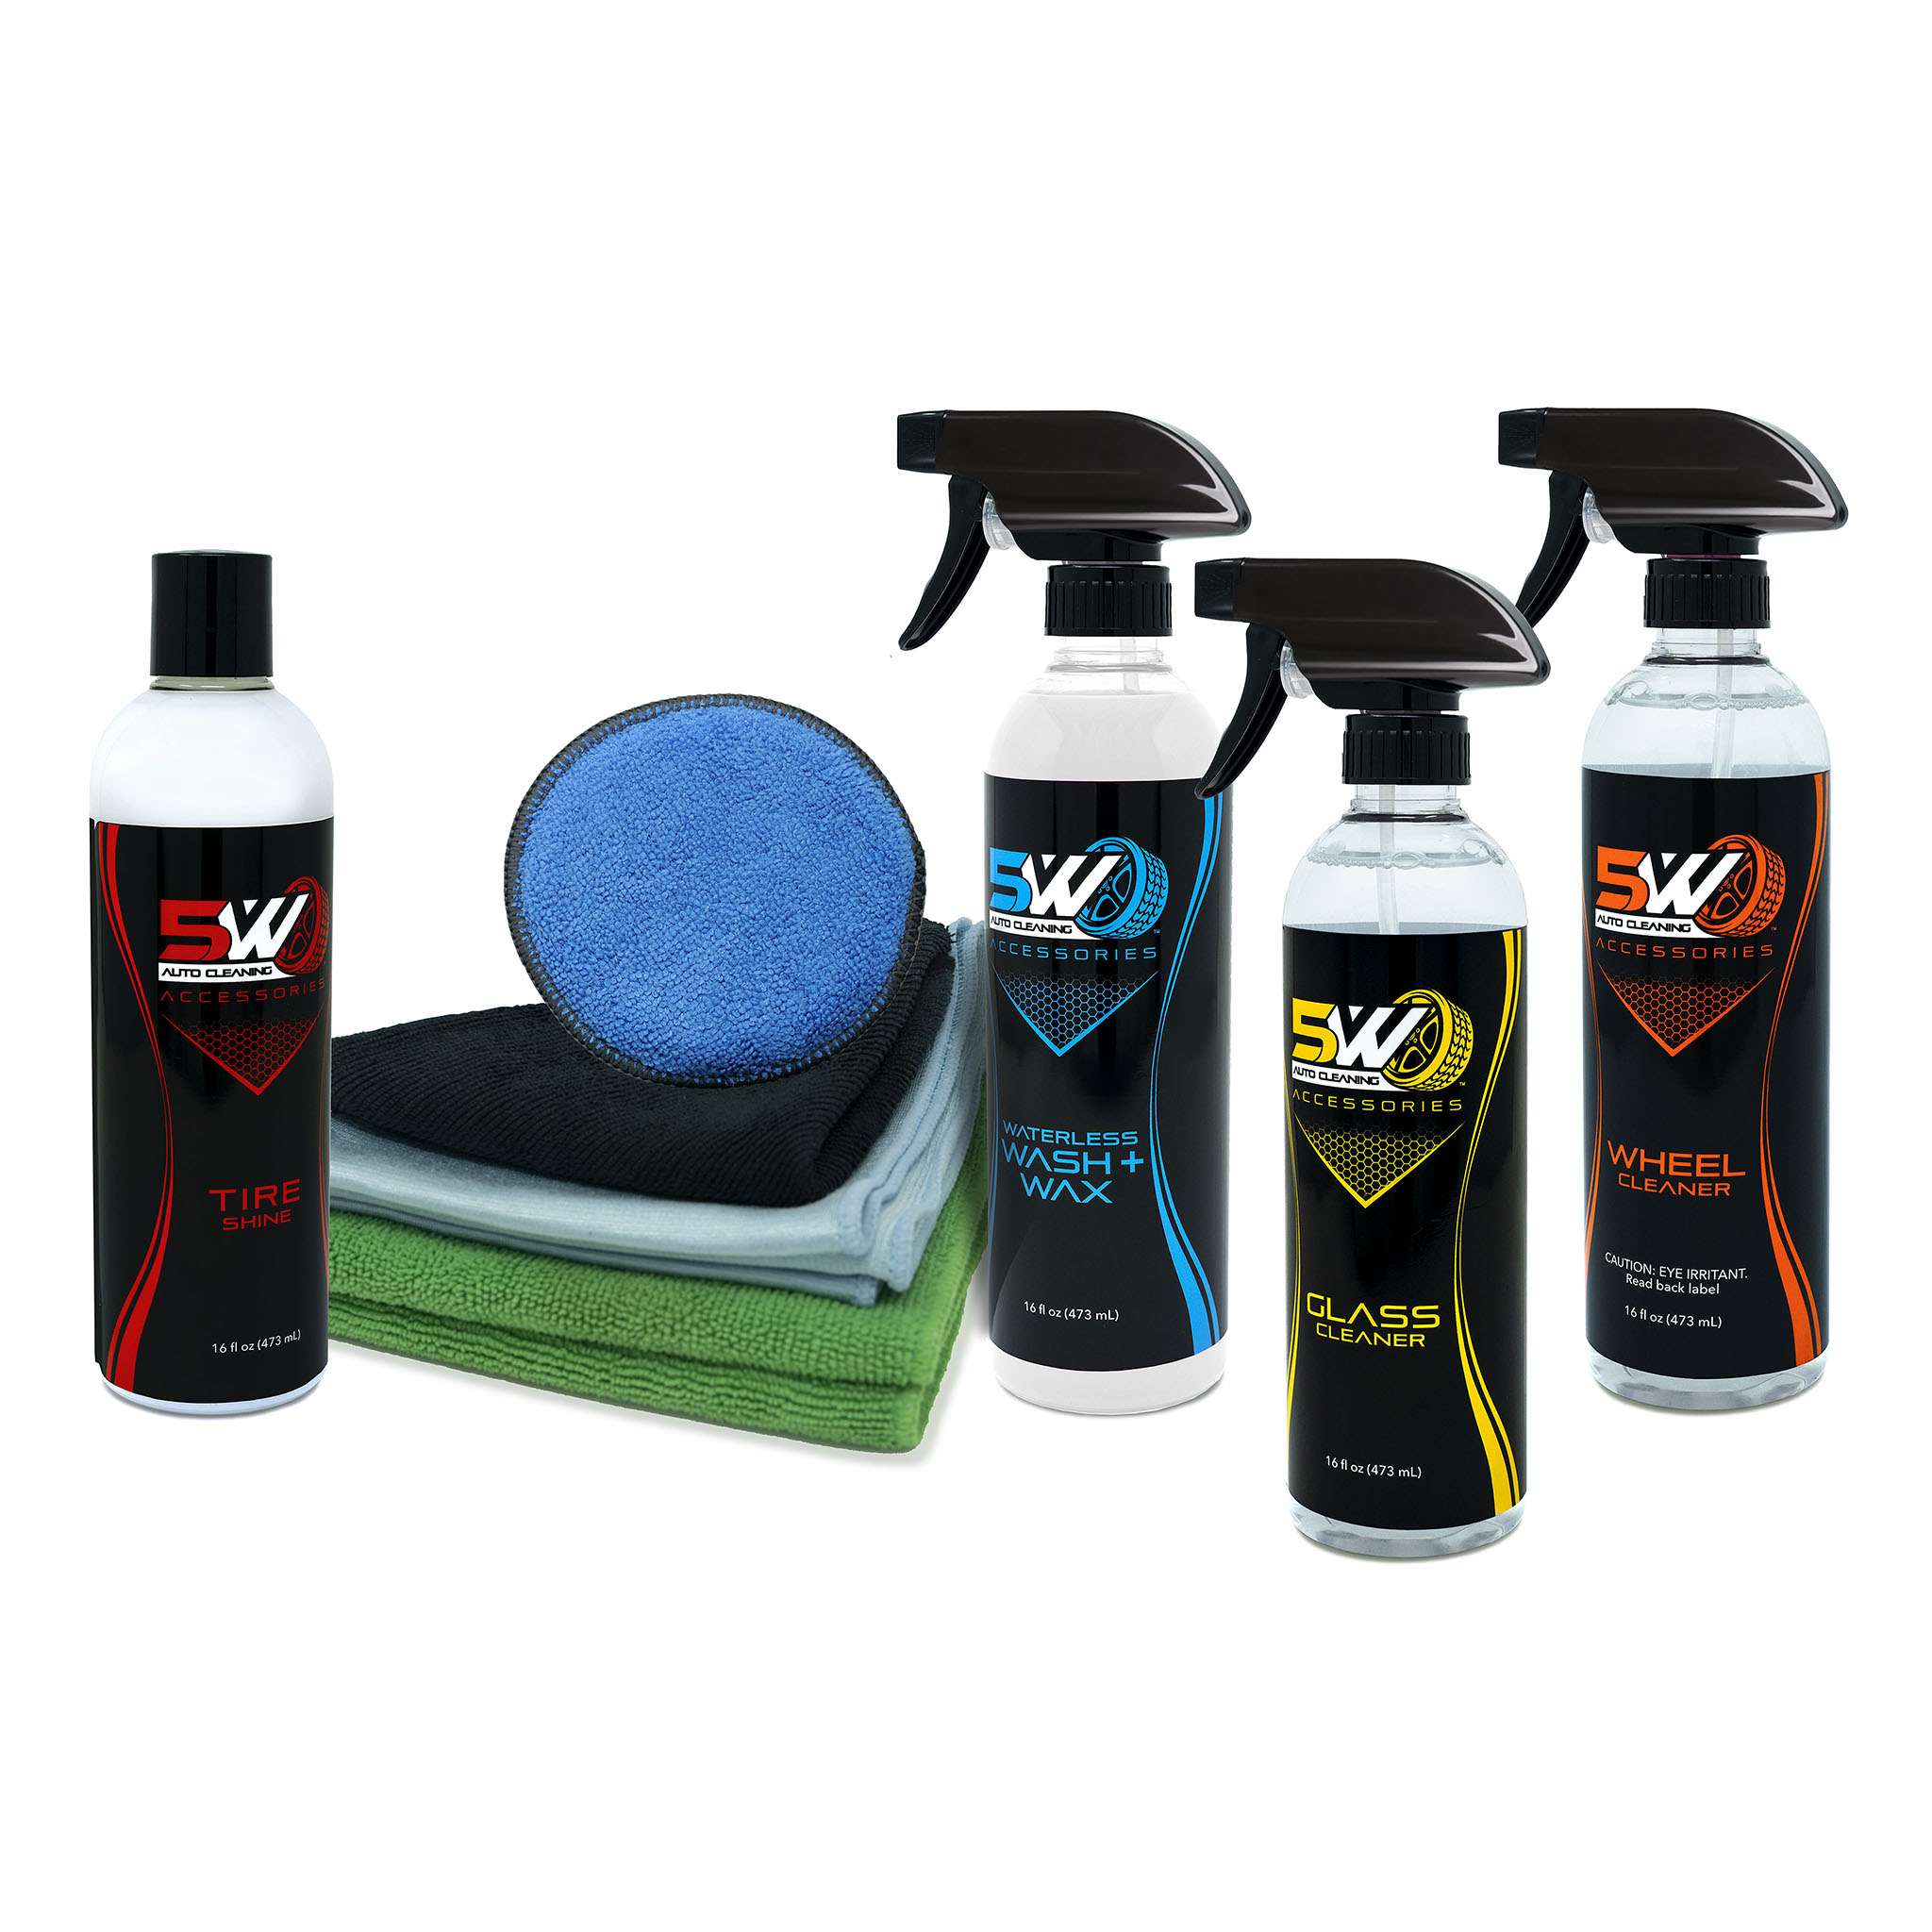 Car cleaning products: buy car cleaner & exterior care products